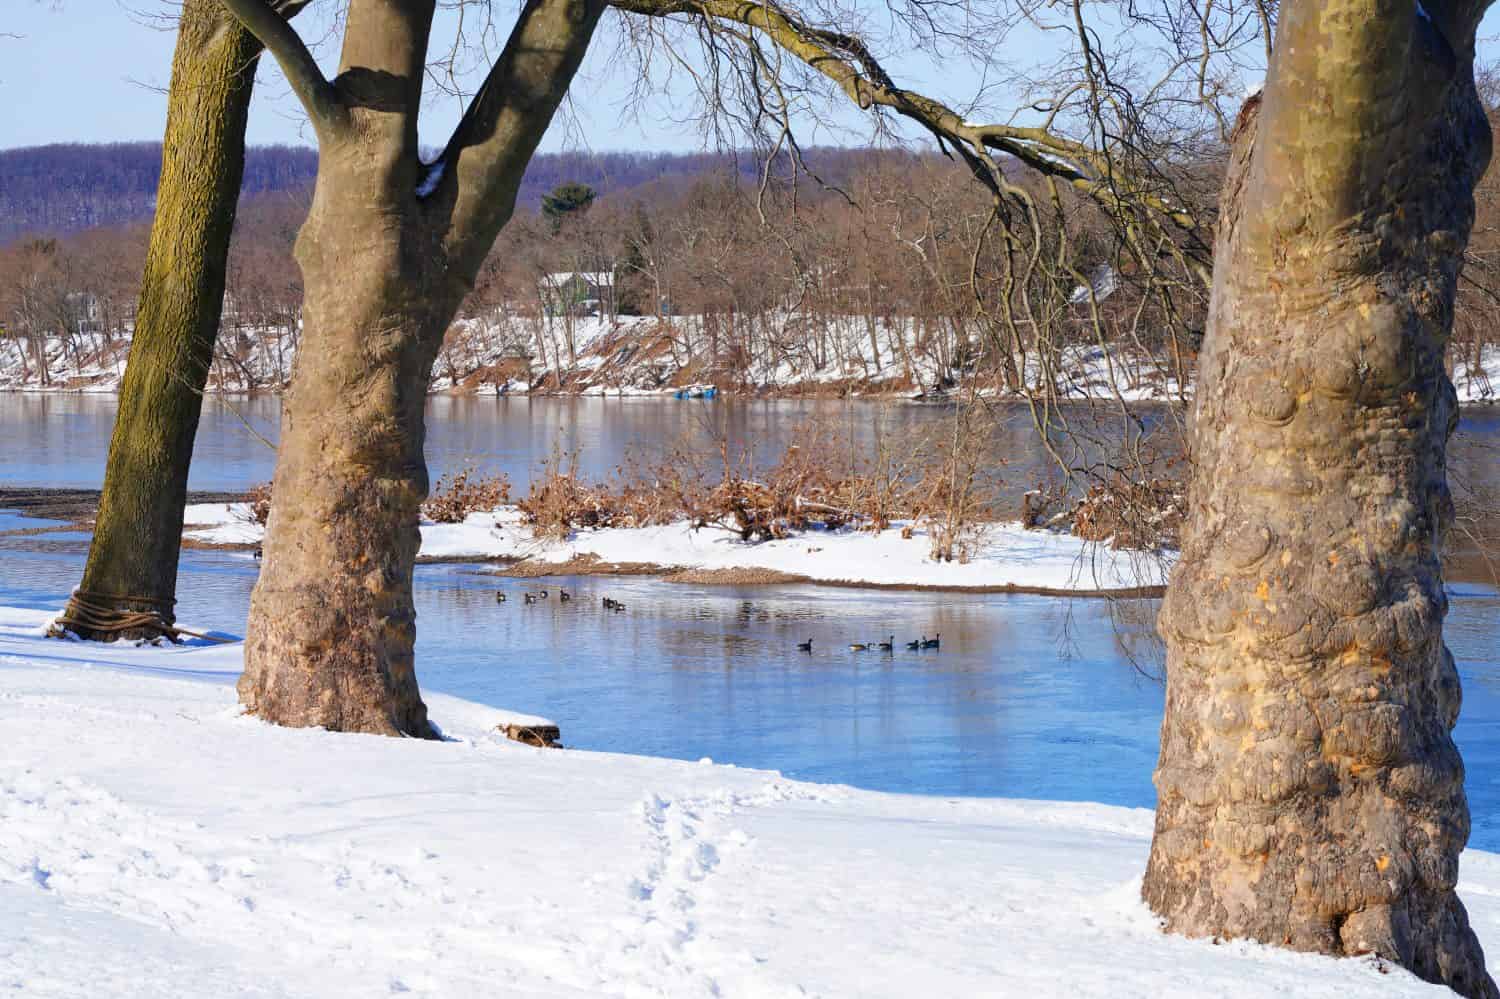 Winter view of the Delaware River connecting Bucks County, Pennsylvania, and Hunterdon County, New Jersey in Washington Crossing